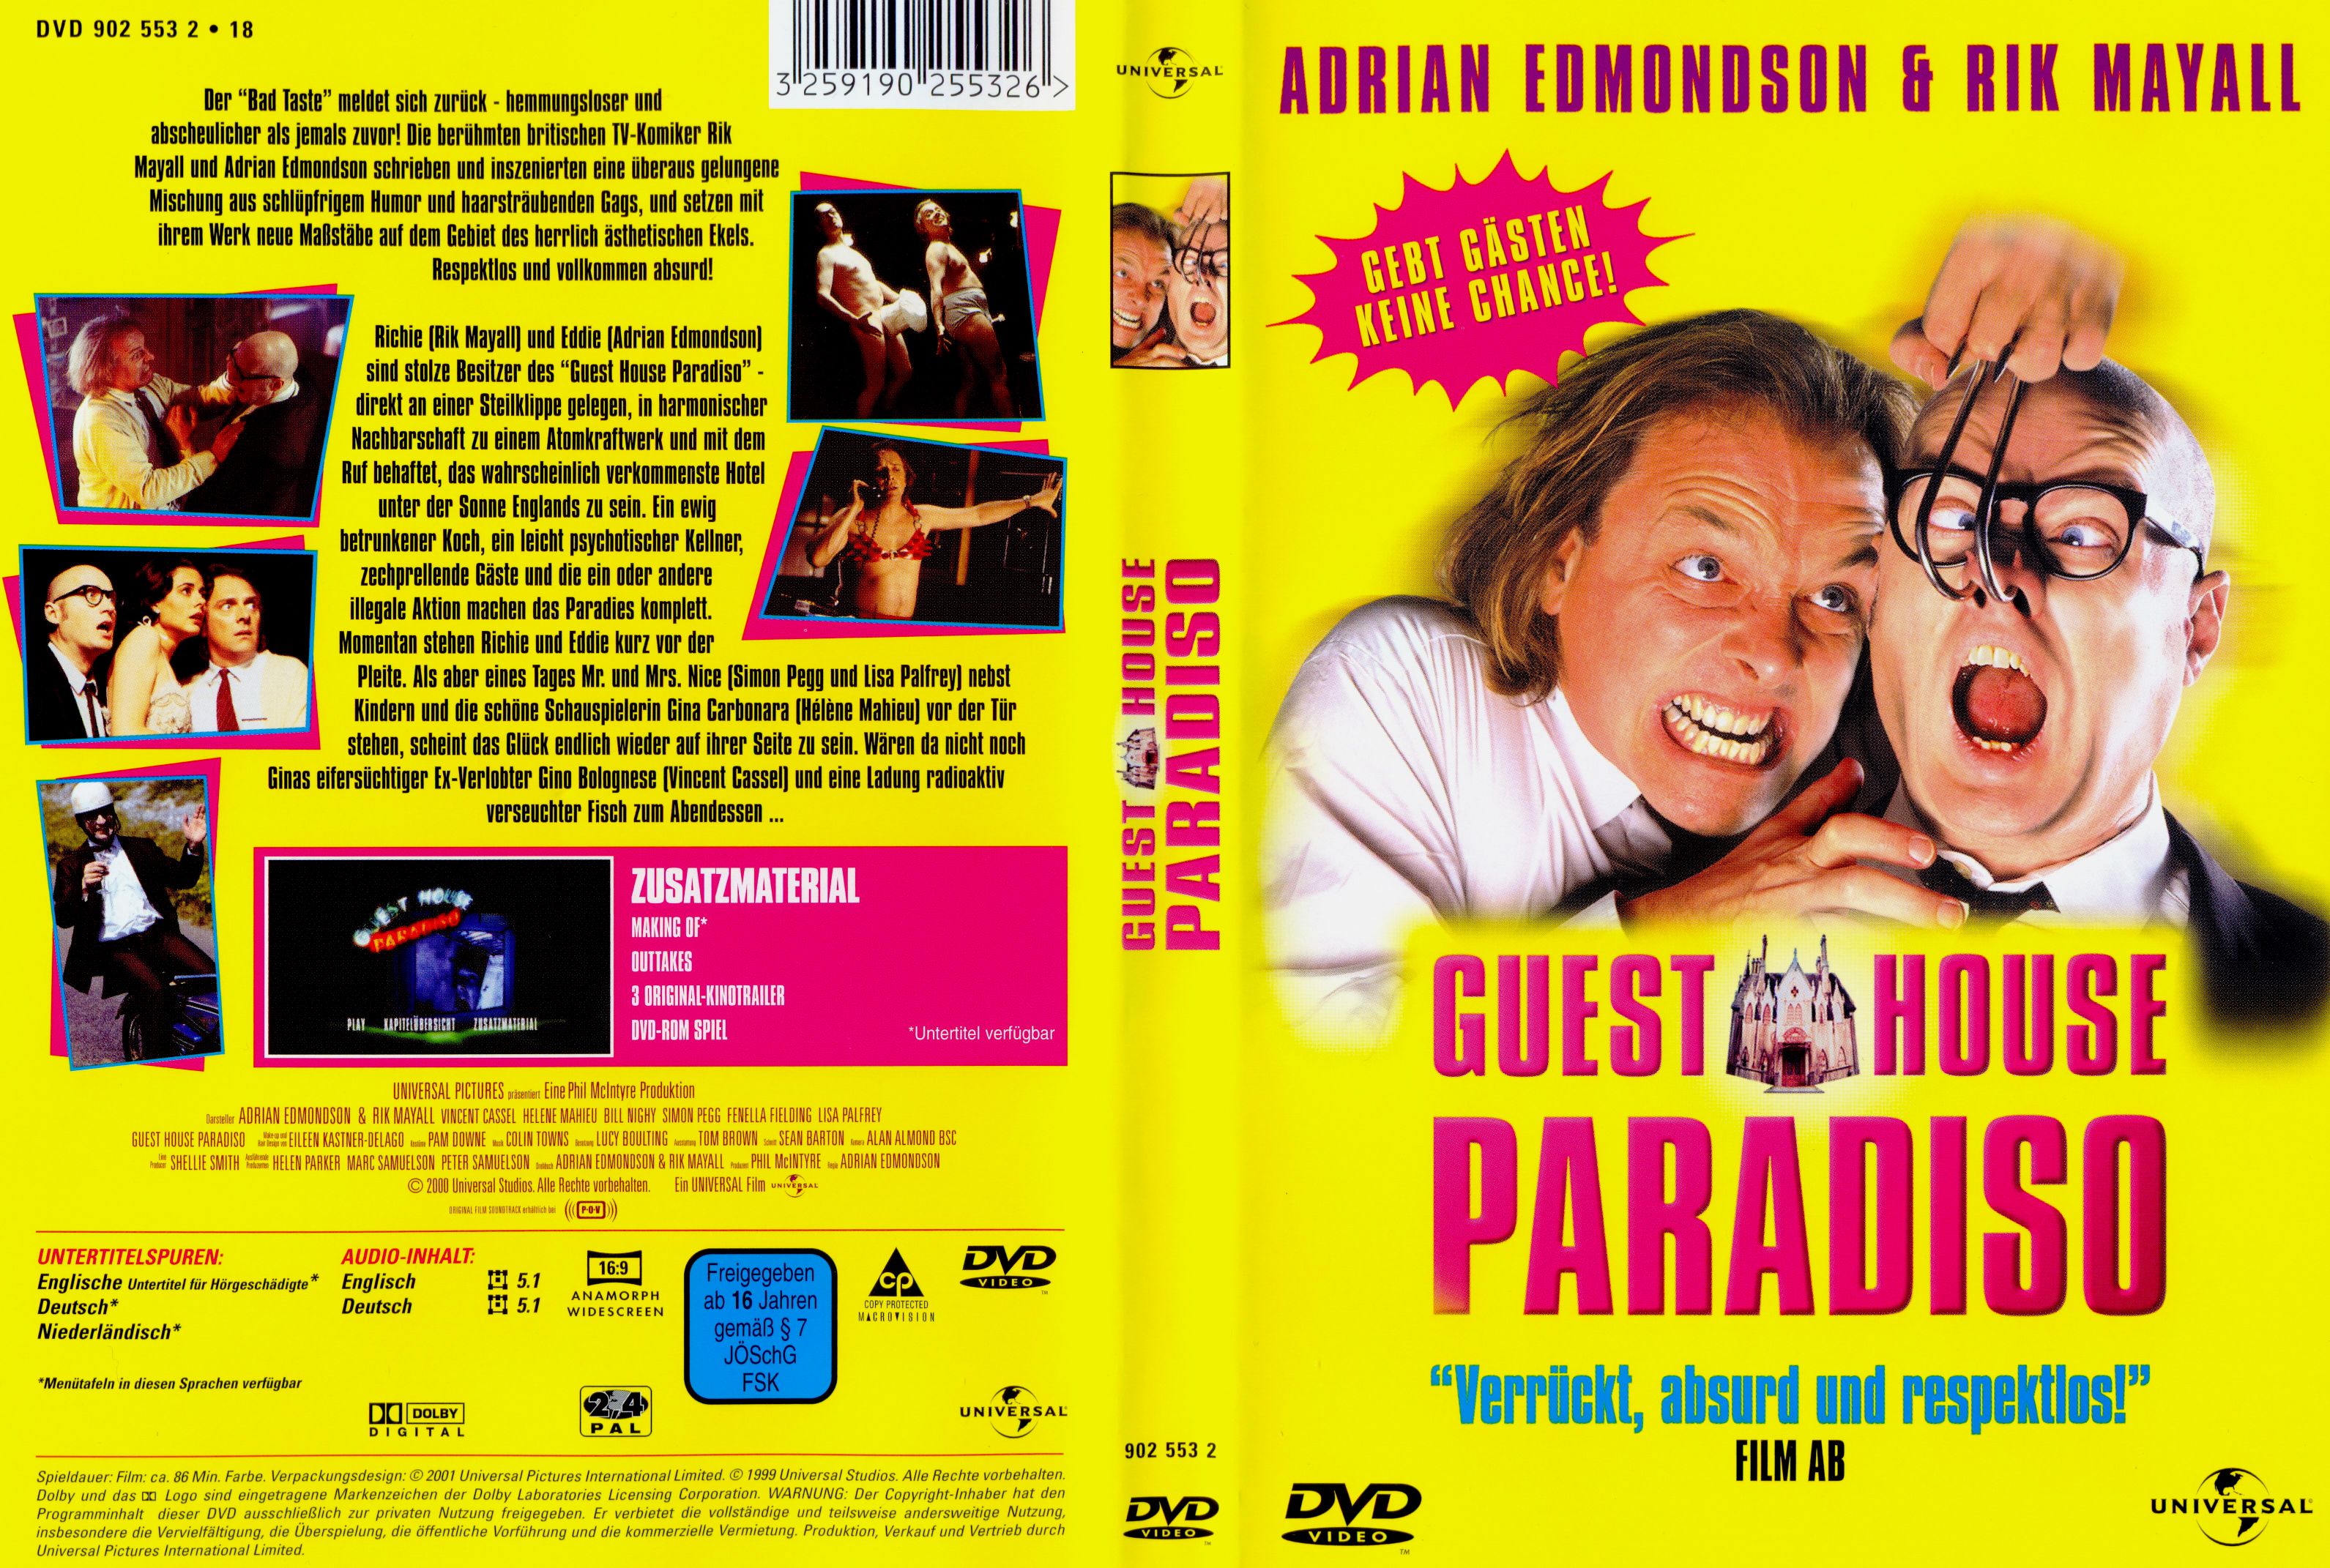 guest house paradiso | DVD Covers | Cover Century | Over 1.000.000 ...